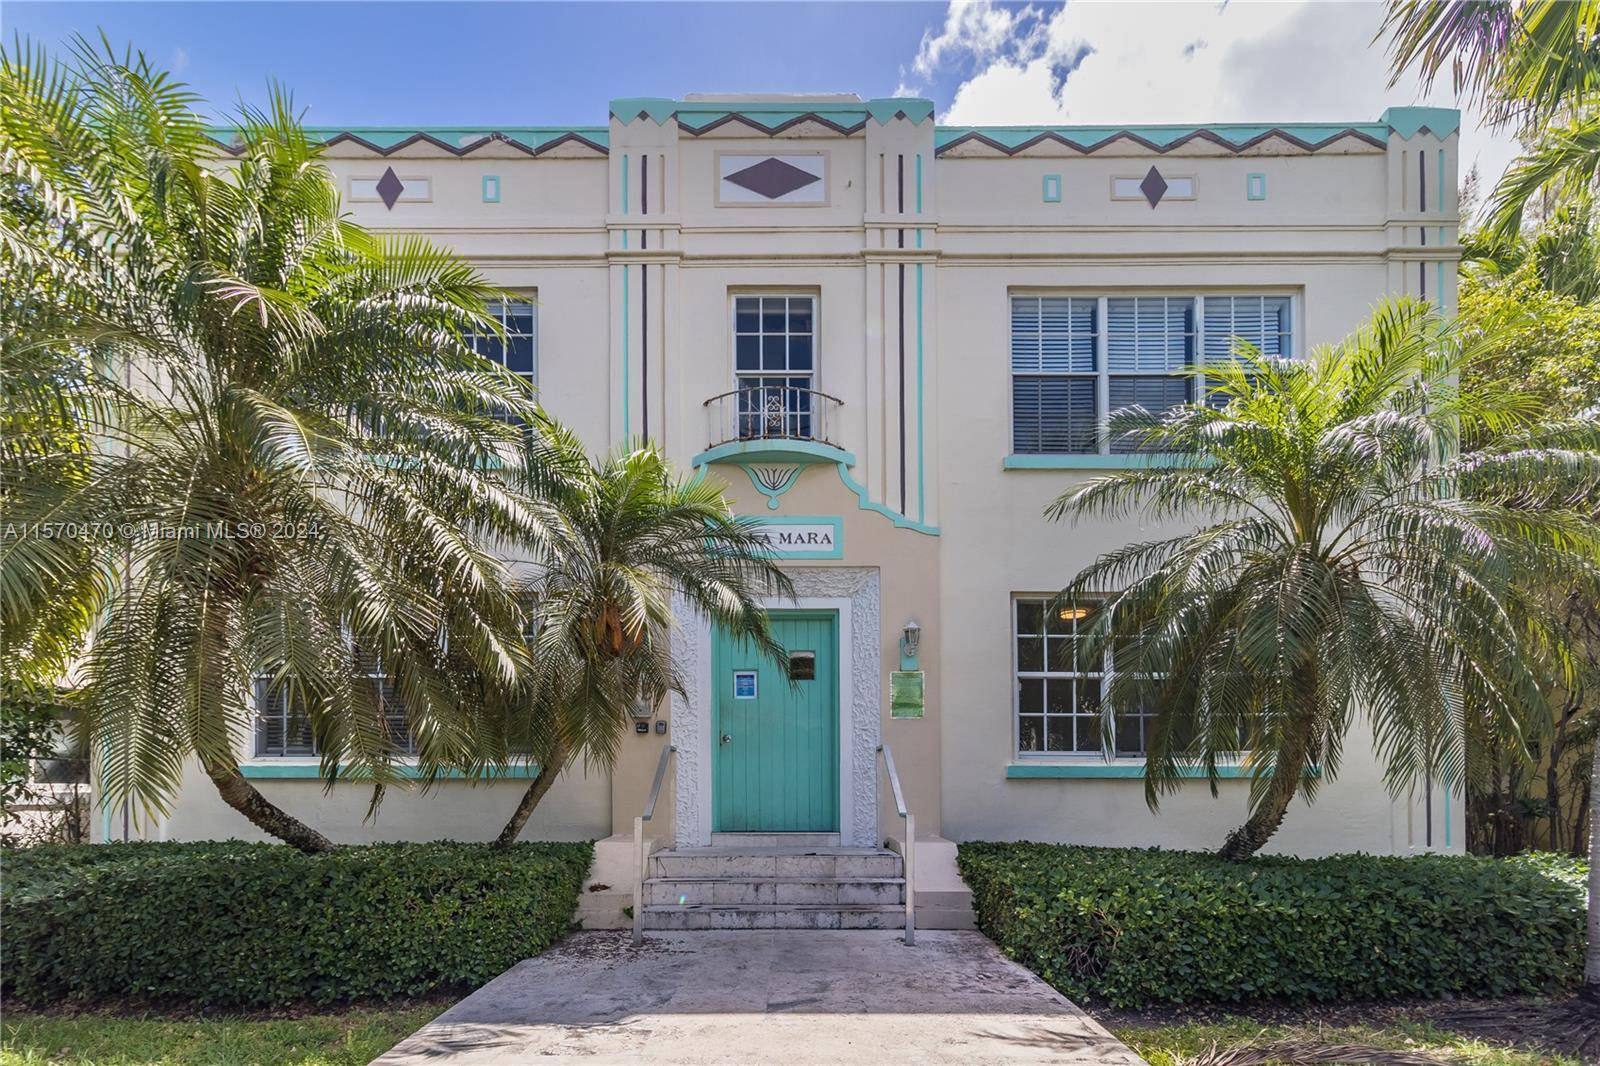 Spacious front corner residence with lots of large windows and light in the heart of South Beach.